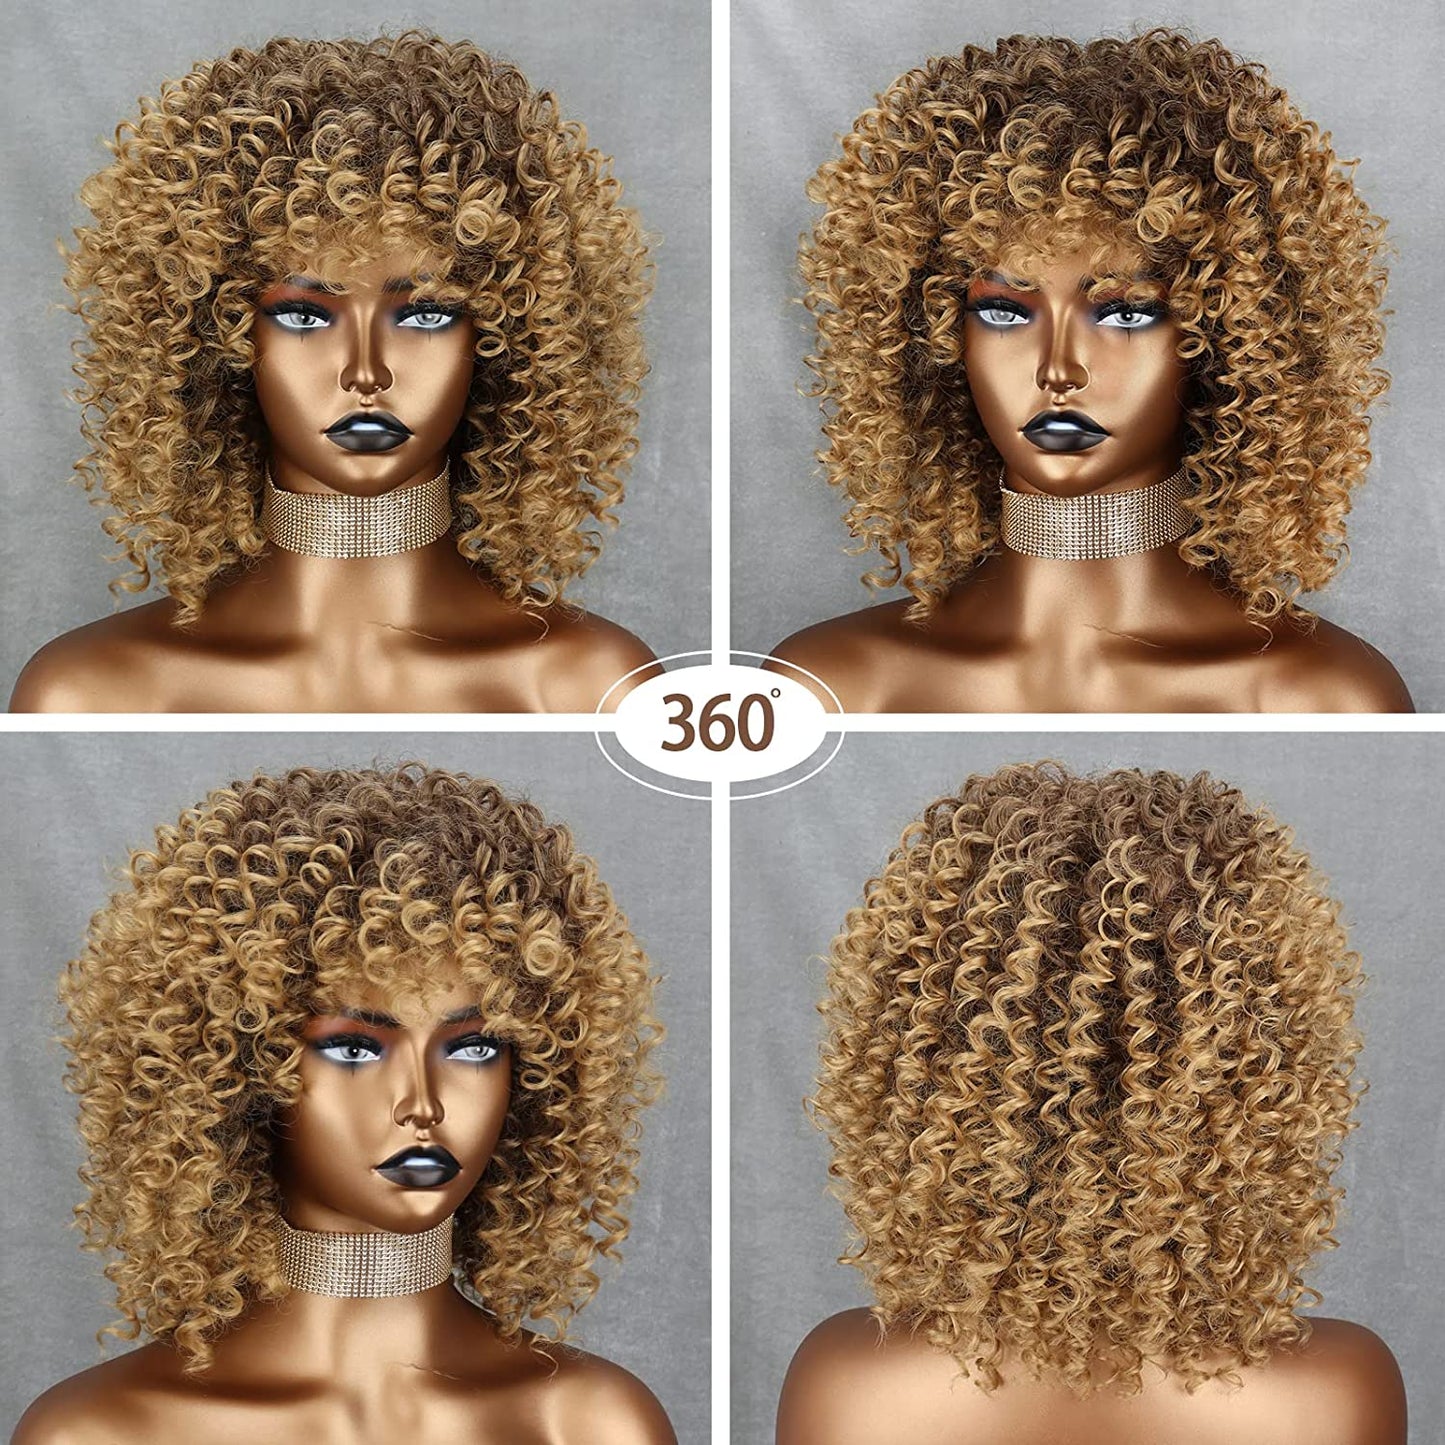 Short Curly Afro Wig for Black Women